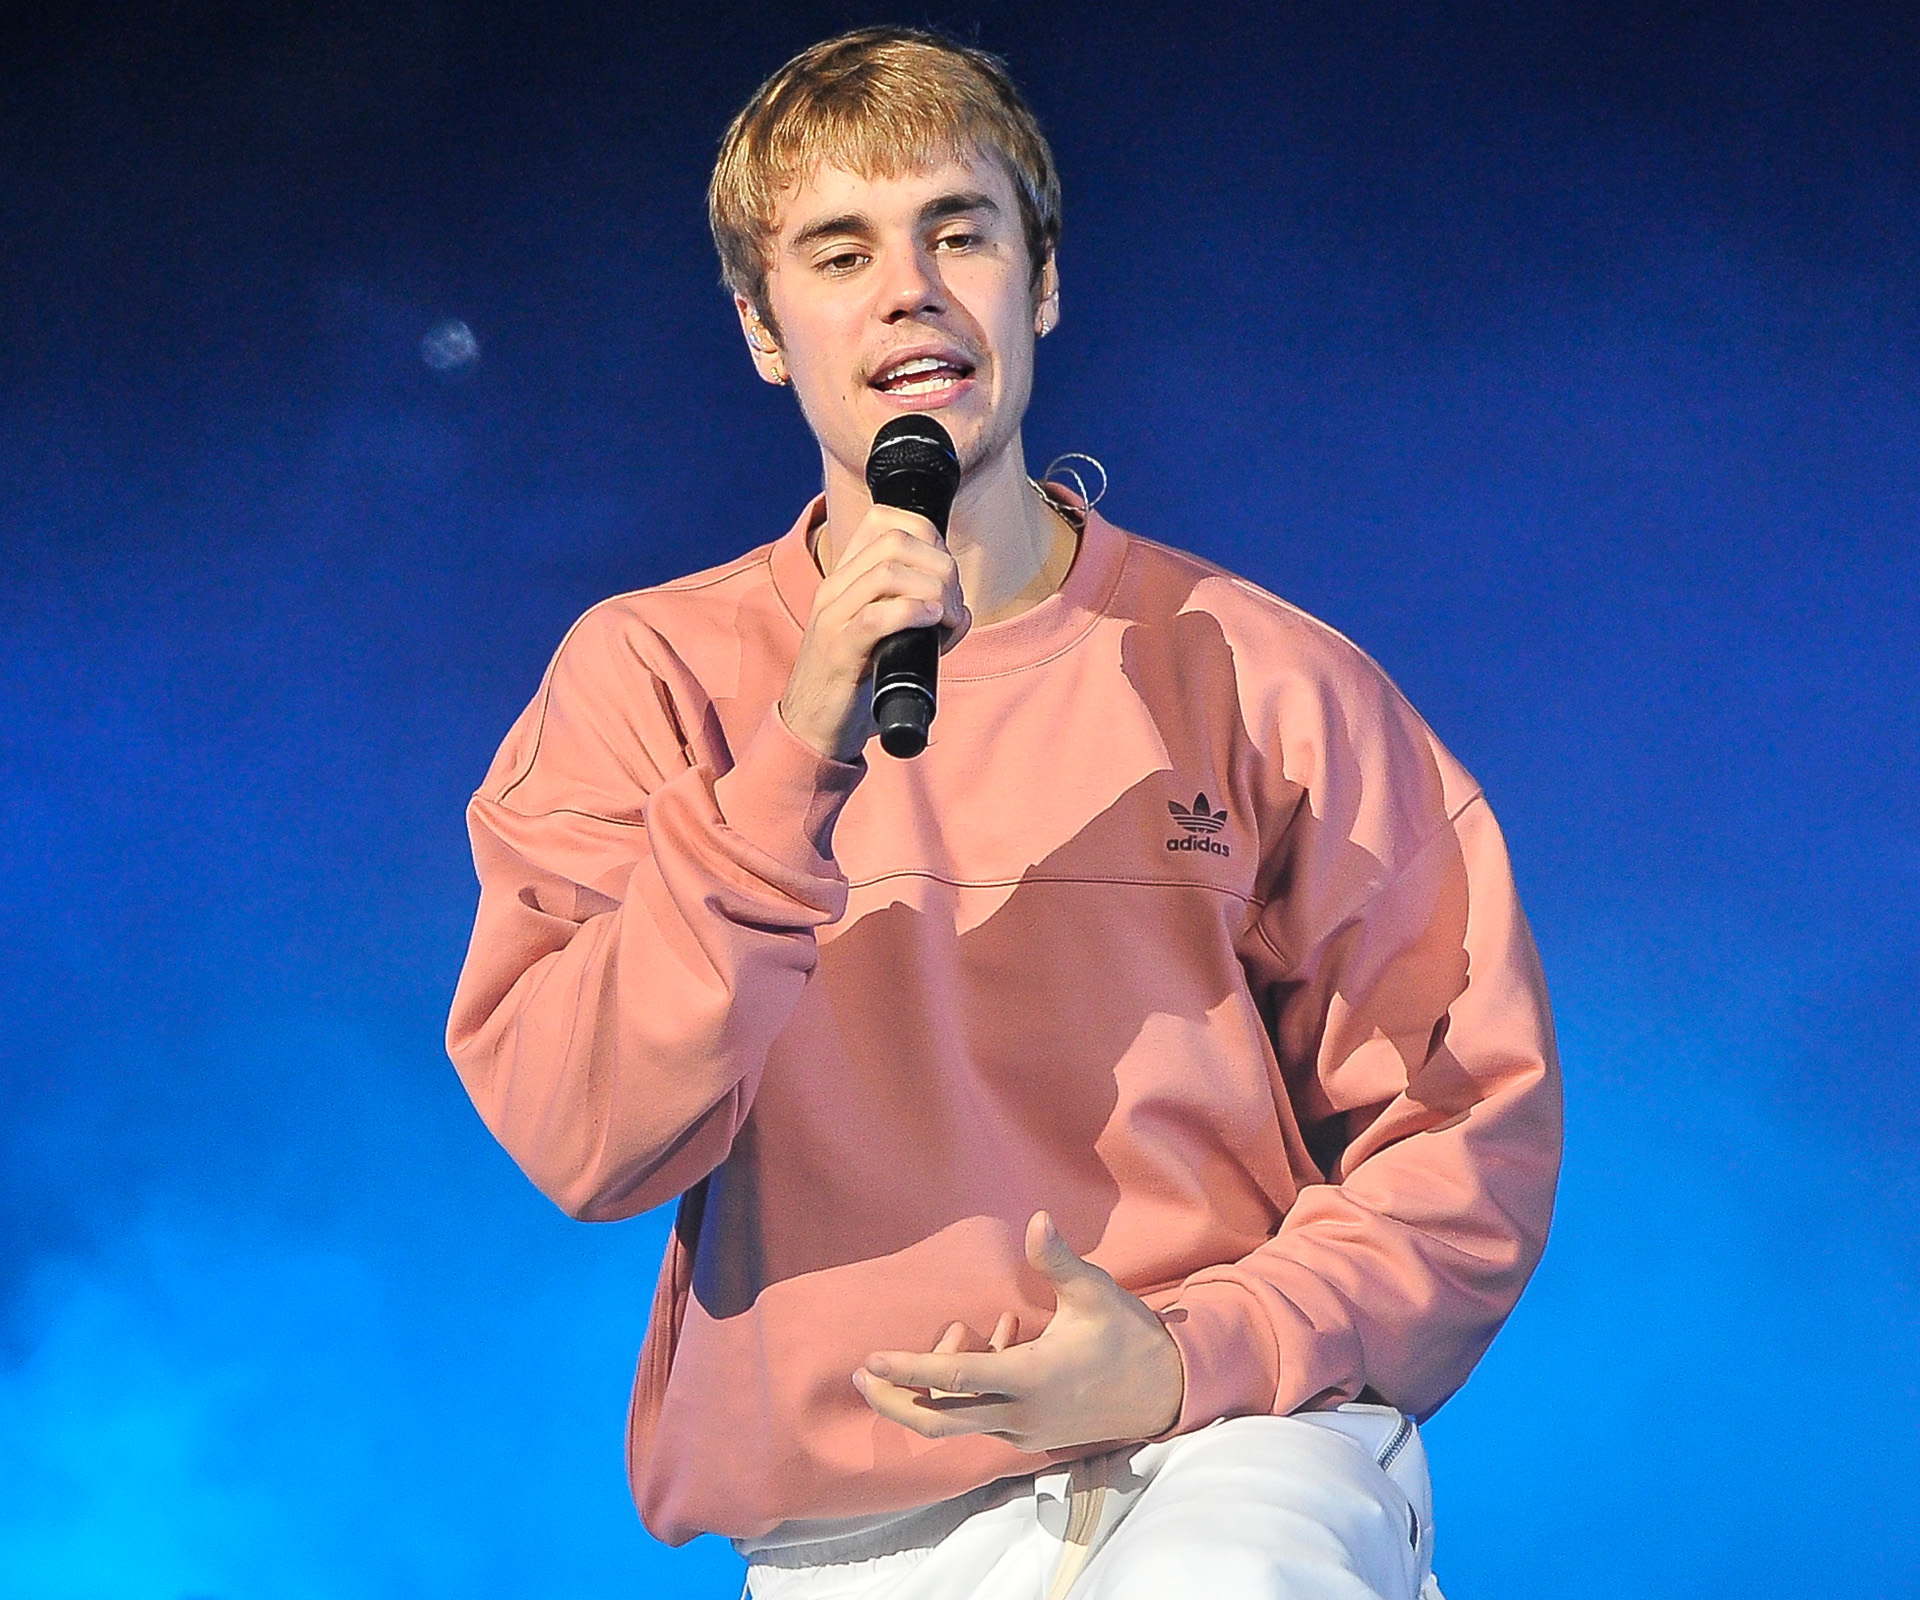 Justin Bieber's management struggled to find the star suitable accommodation in Auckland